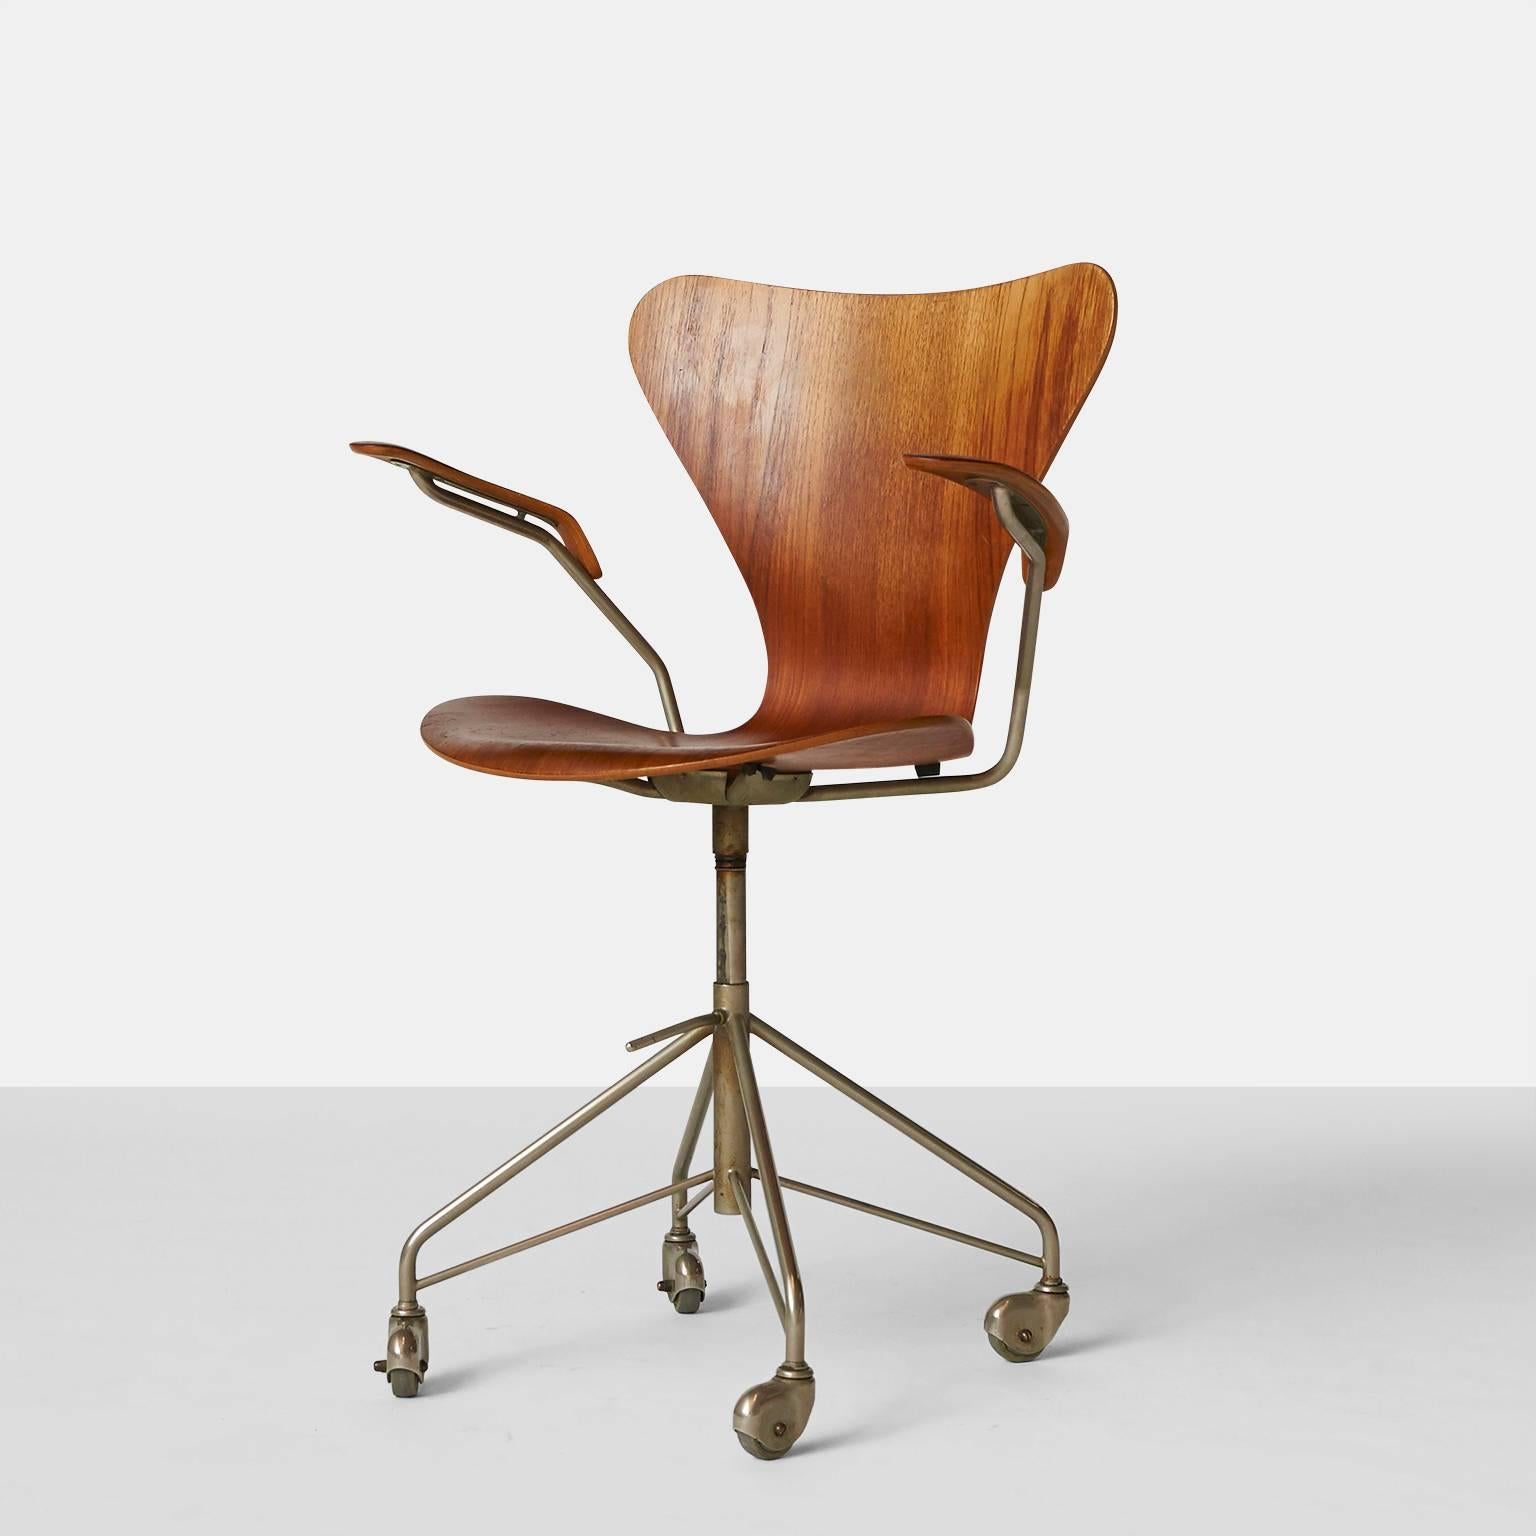 Arne Jacobsen, Series 7 office chair, model 3217.
A swivel desk chair in teak with a height adjustable, four-star, chromed steel base on casters. Early model of the base. Produced by Fritz Hansen.
Denmark, circa 1955.